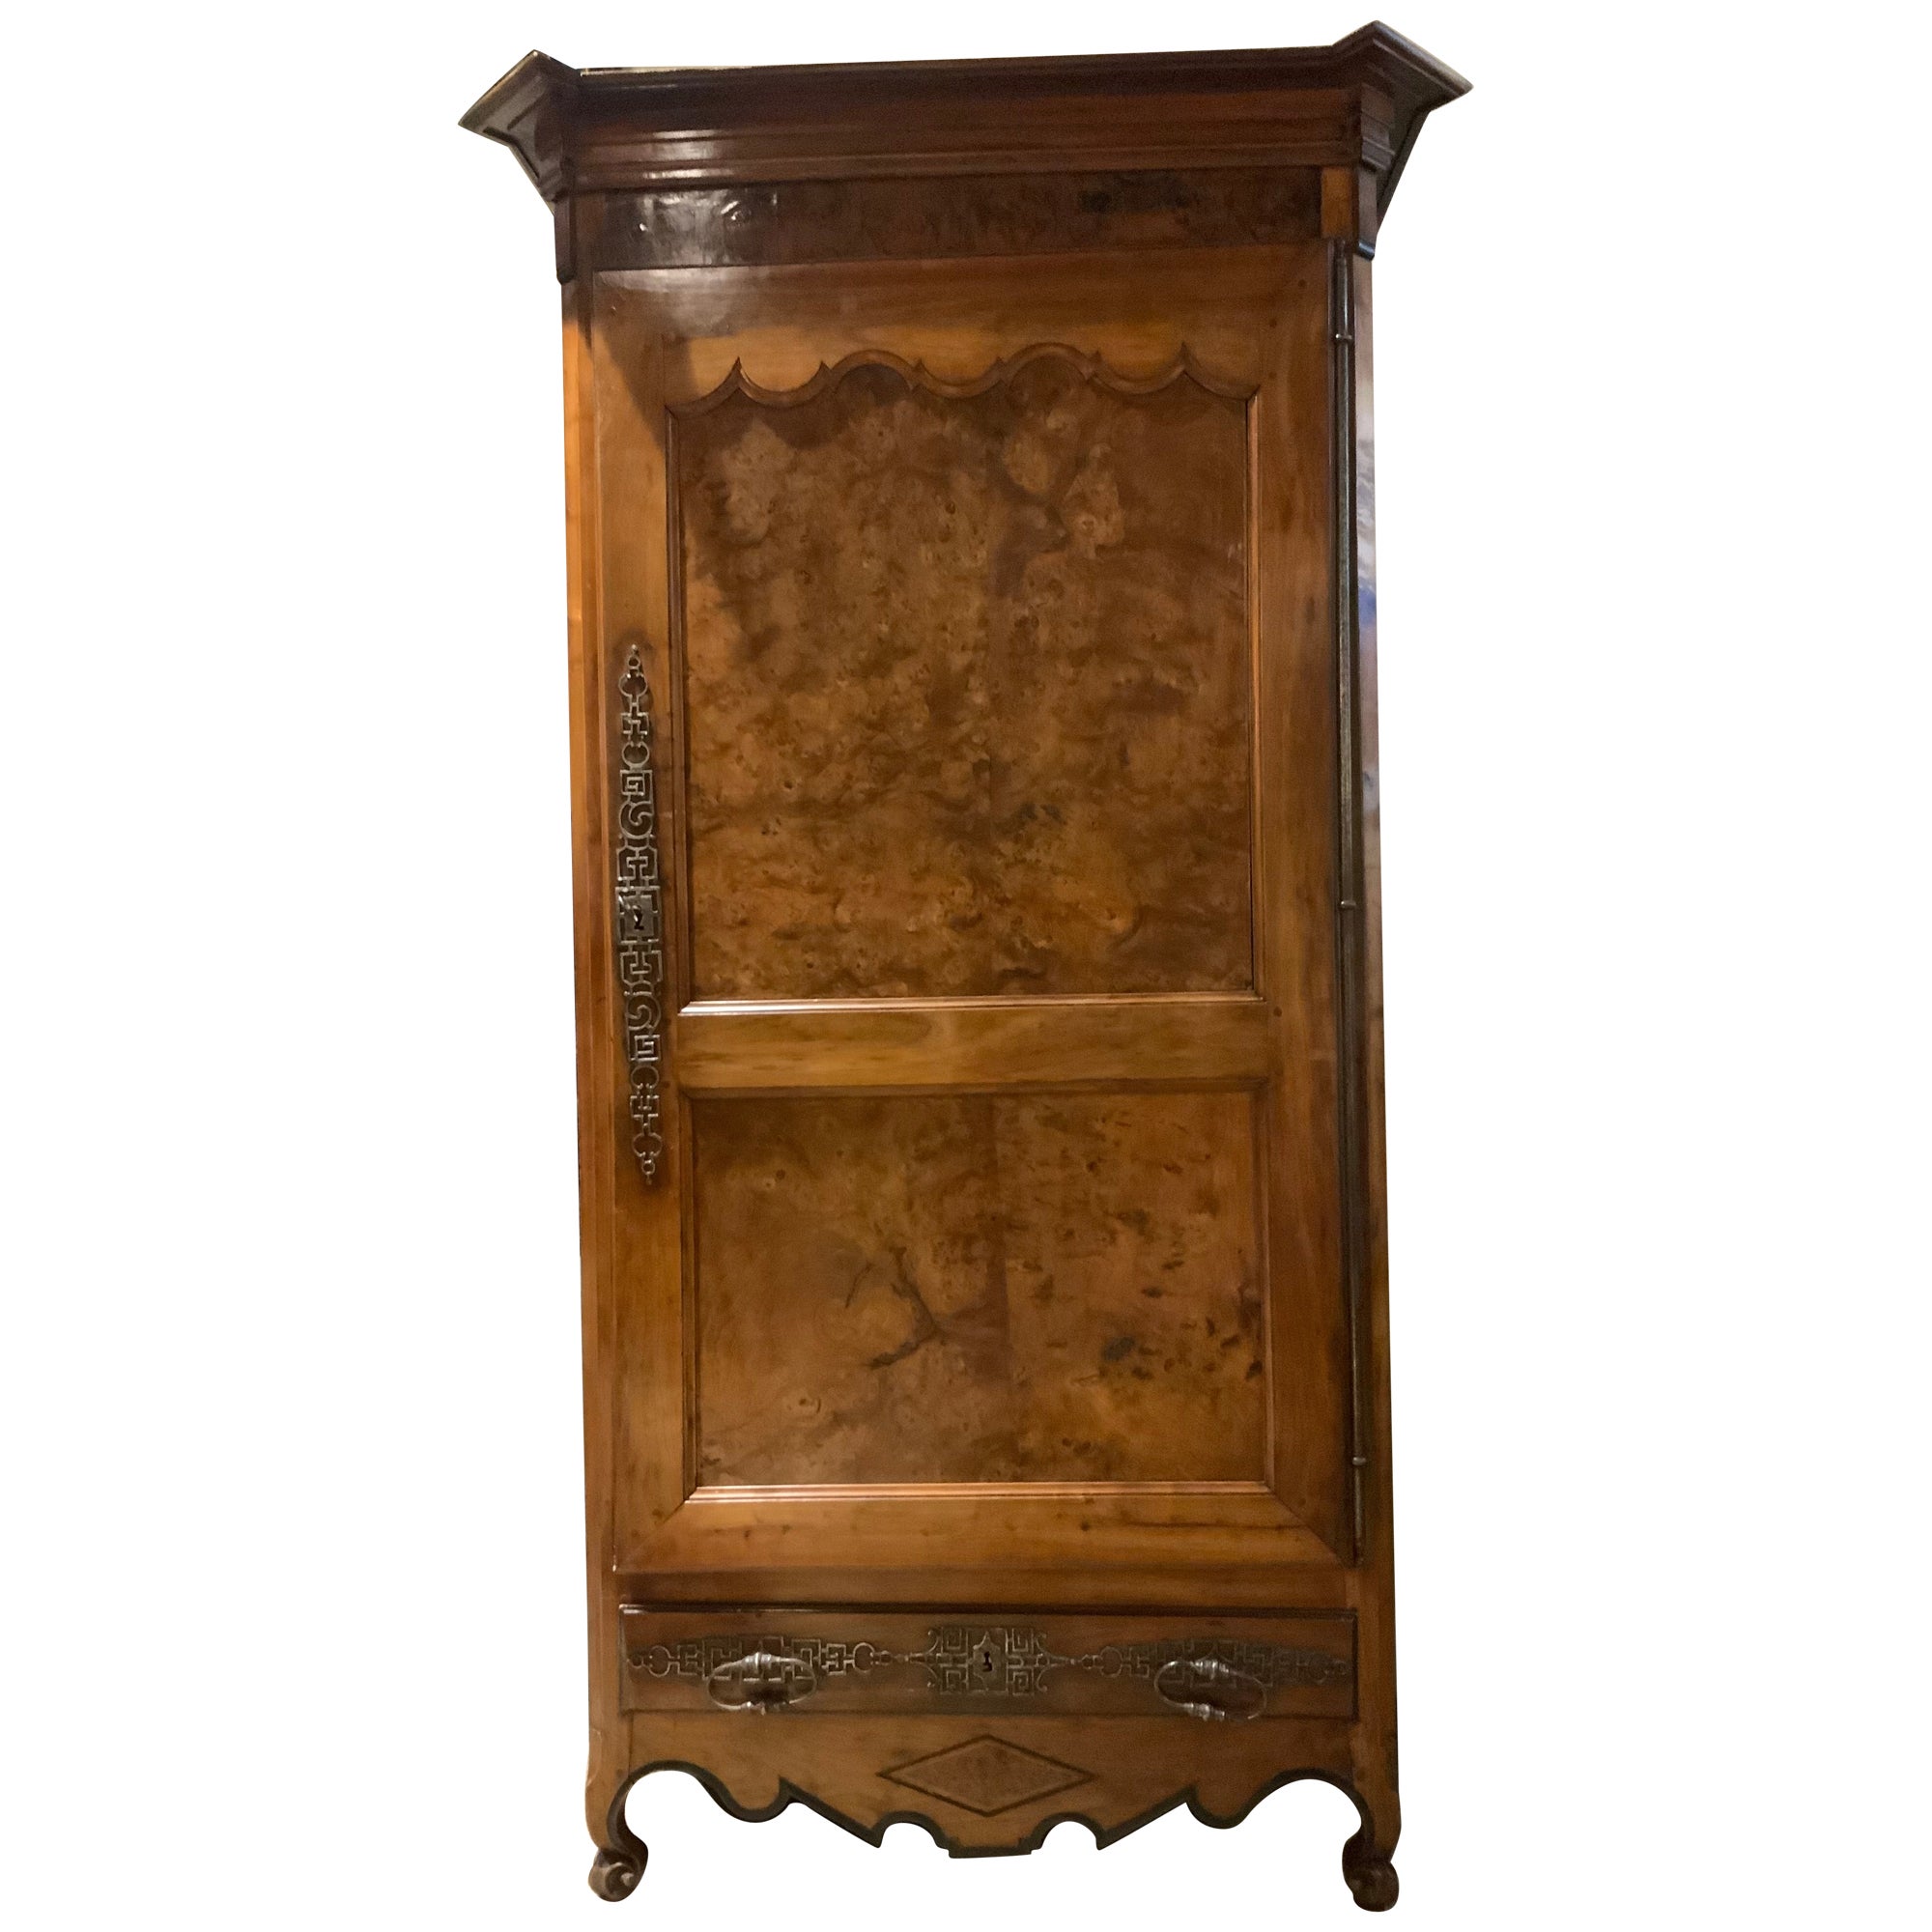 French provincial armoire/Bonnetiere 19 th c burled walnut